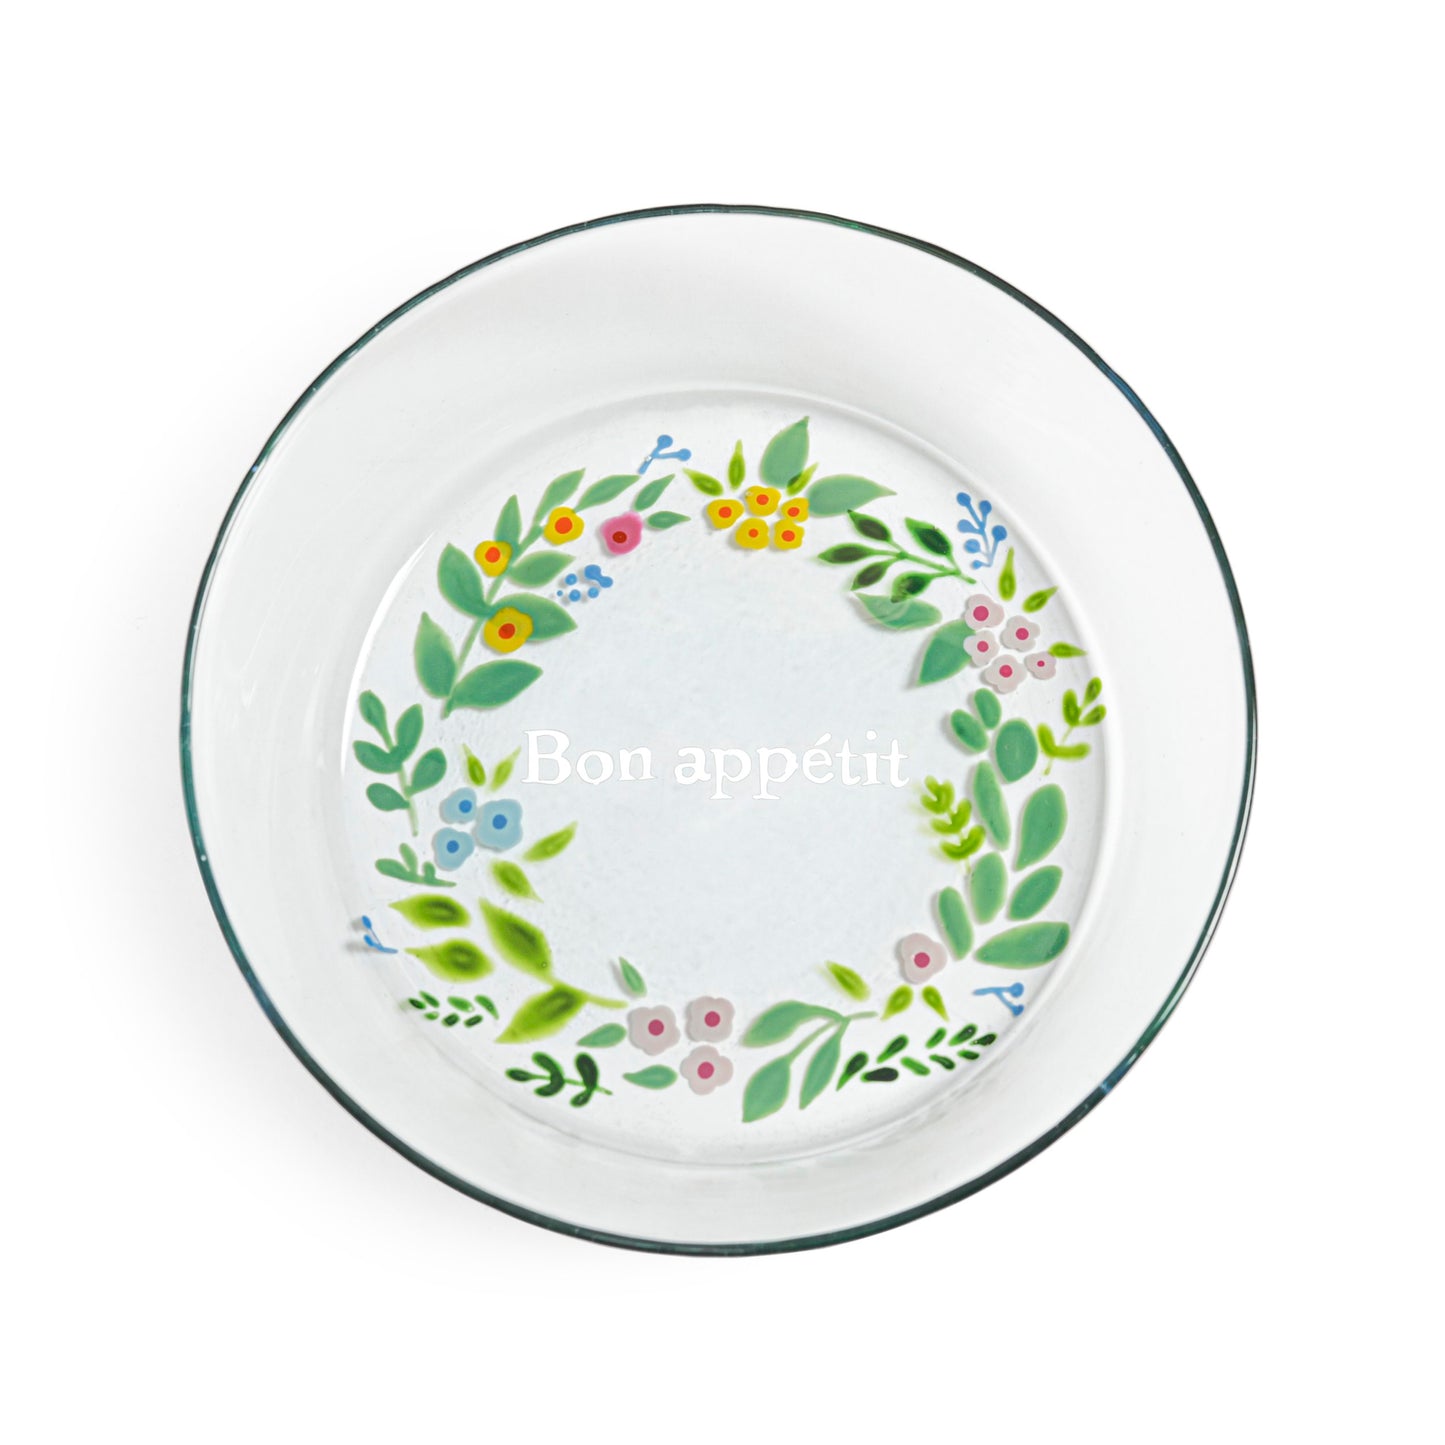 Hand painted plate | CROWN OF FLOWERS: GOOD APPETITE